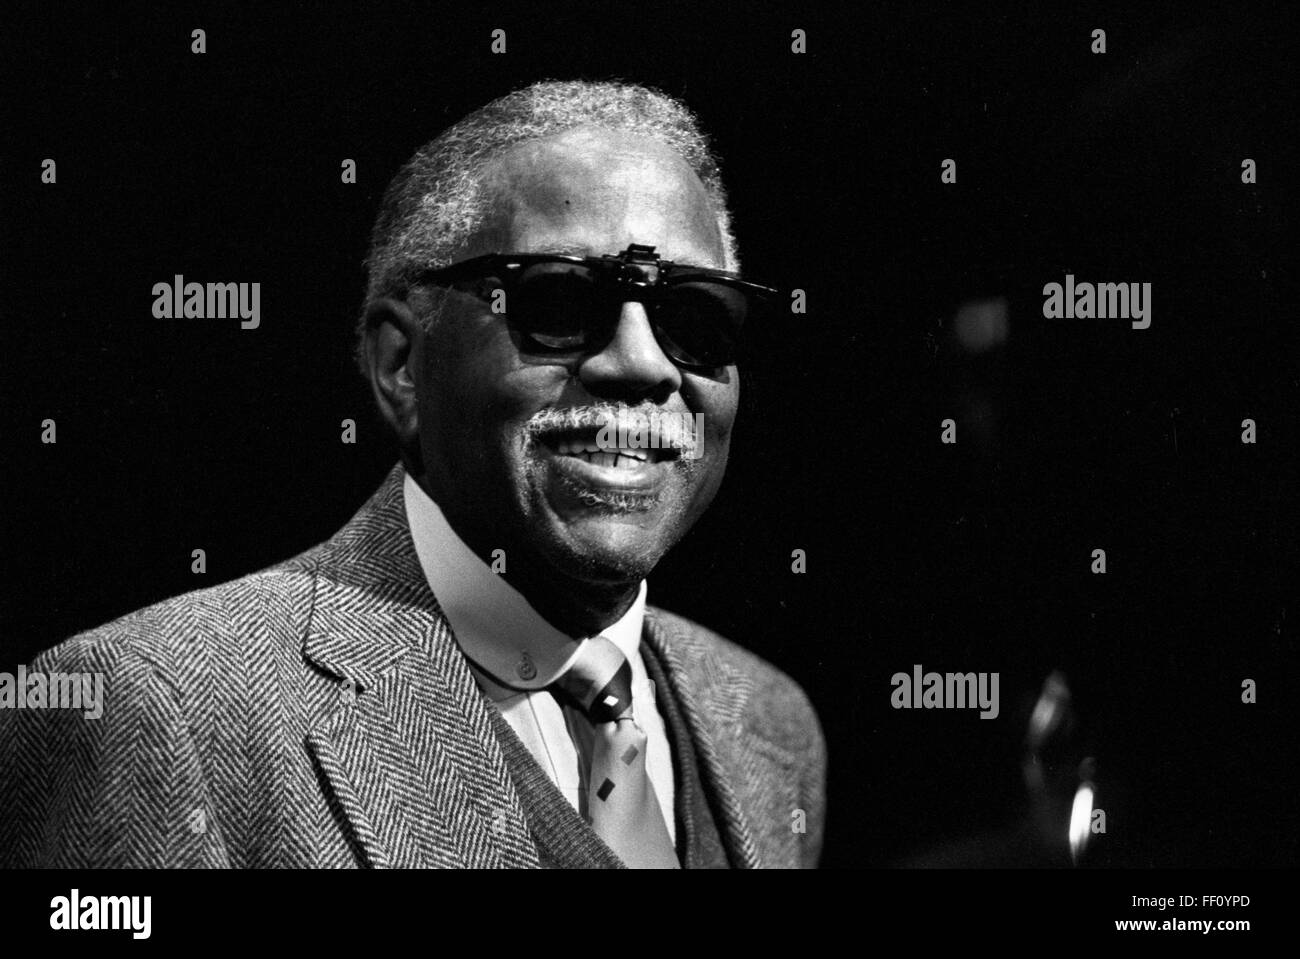 Roy Eldridge during a session in New York City. This event, in 1985 at the Vineyard Theater in New York City, was a tribute to the legendary Jimmy Ryan’s jazz club. A recording of this session was released in 1998 titled Spanky and Roy. Stock Photo